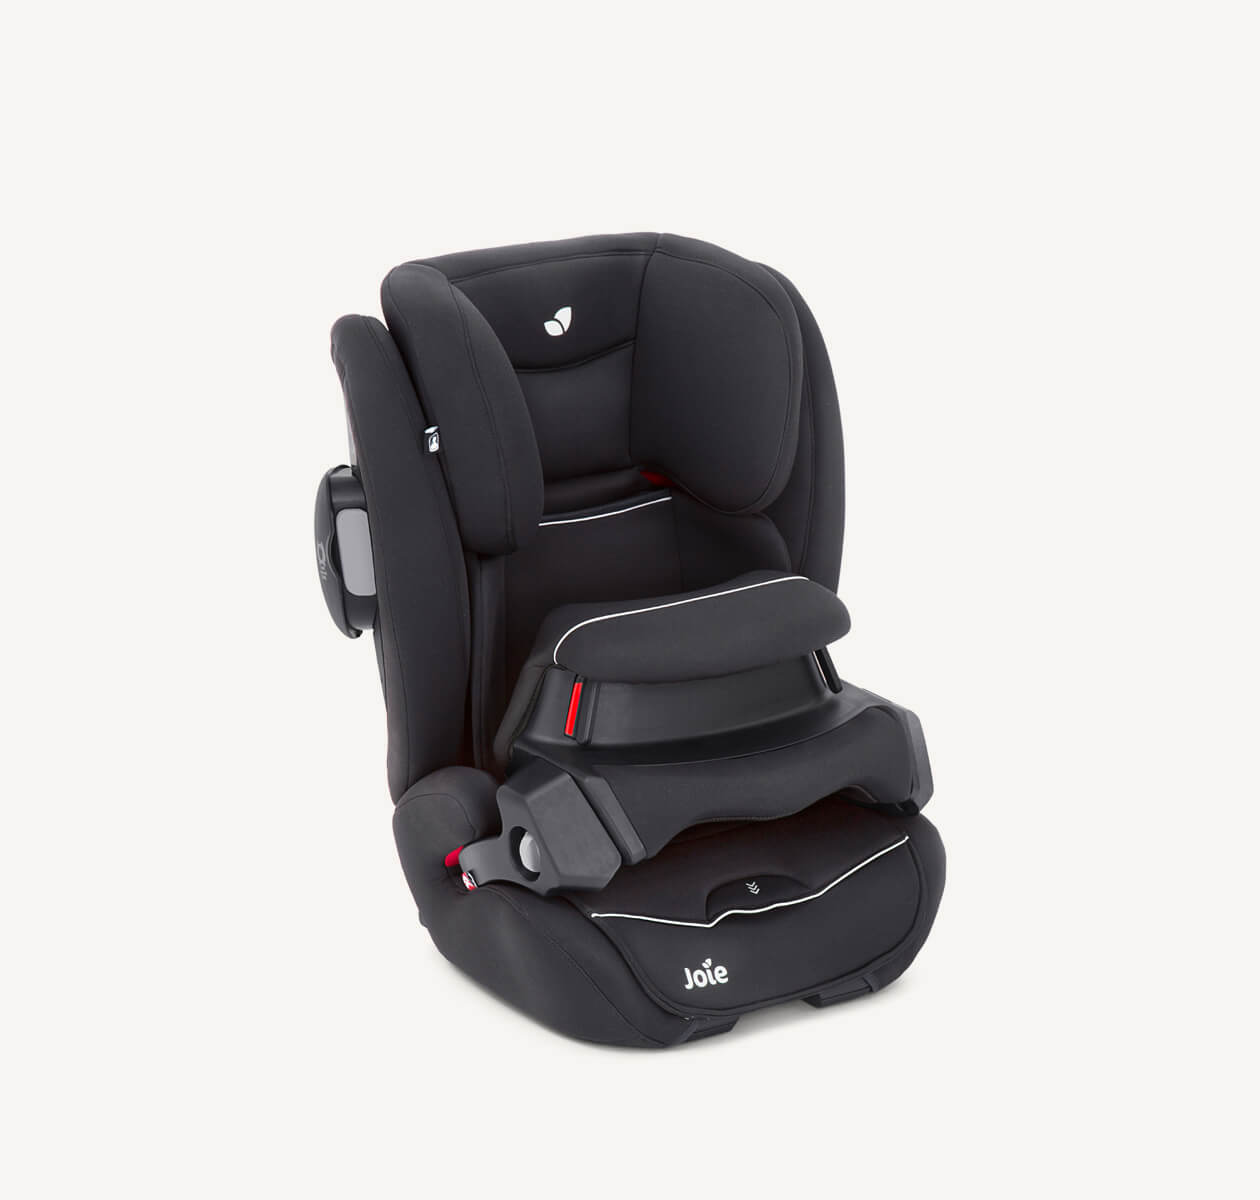  Joie Transcend shielded booster seat in black facing toward the right at an angle.